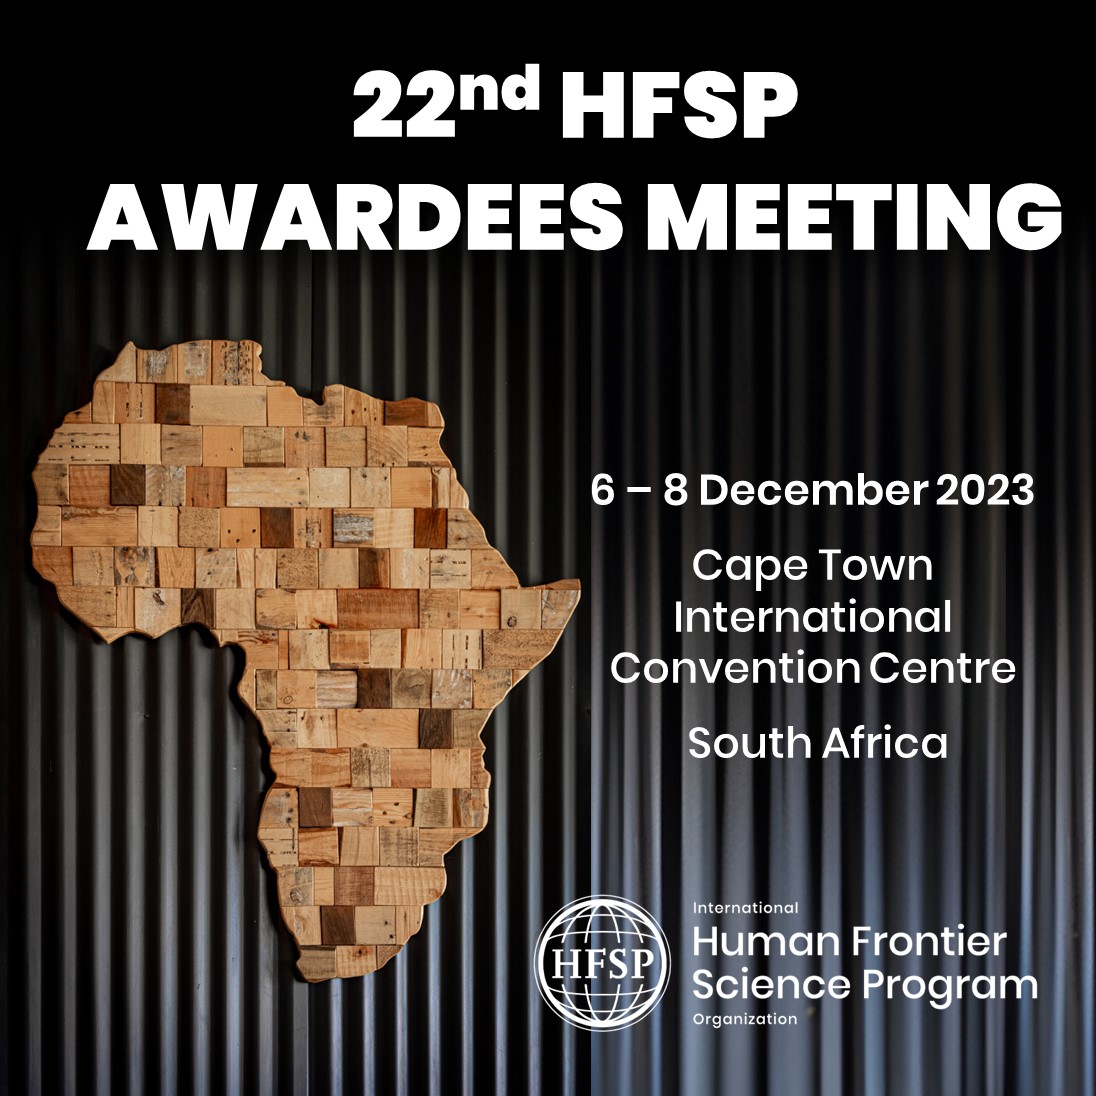 We are getting ready for the #HFSPAwardeesMeeting2023!🙃Let's share the latest trends and get inspired by the most cutting-edge research in #basiclifesciences!👀See you soon in #CapeTown, #SouthAfrica 🇿🇦 Who's coming?